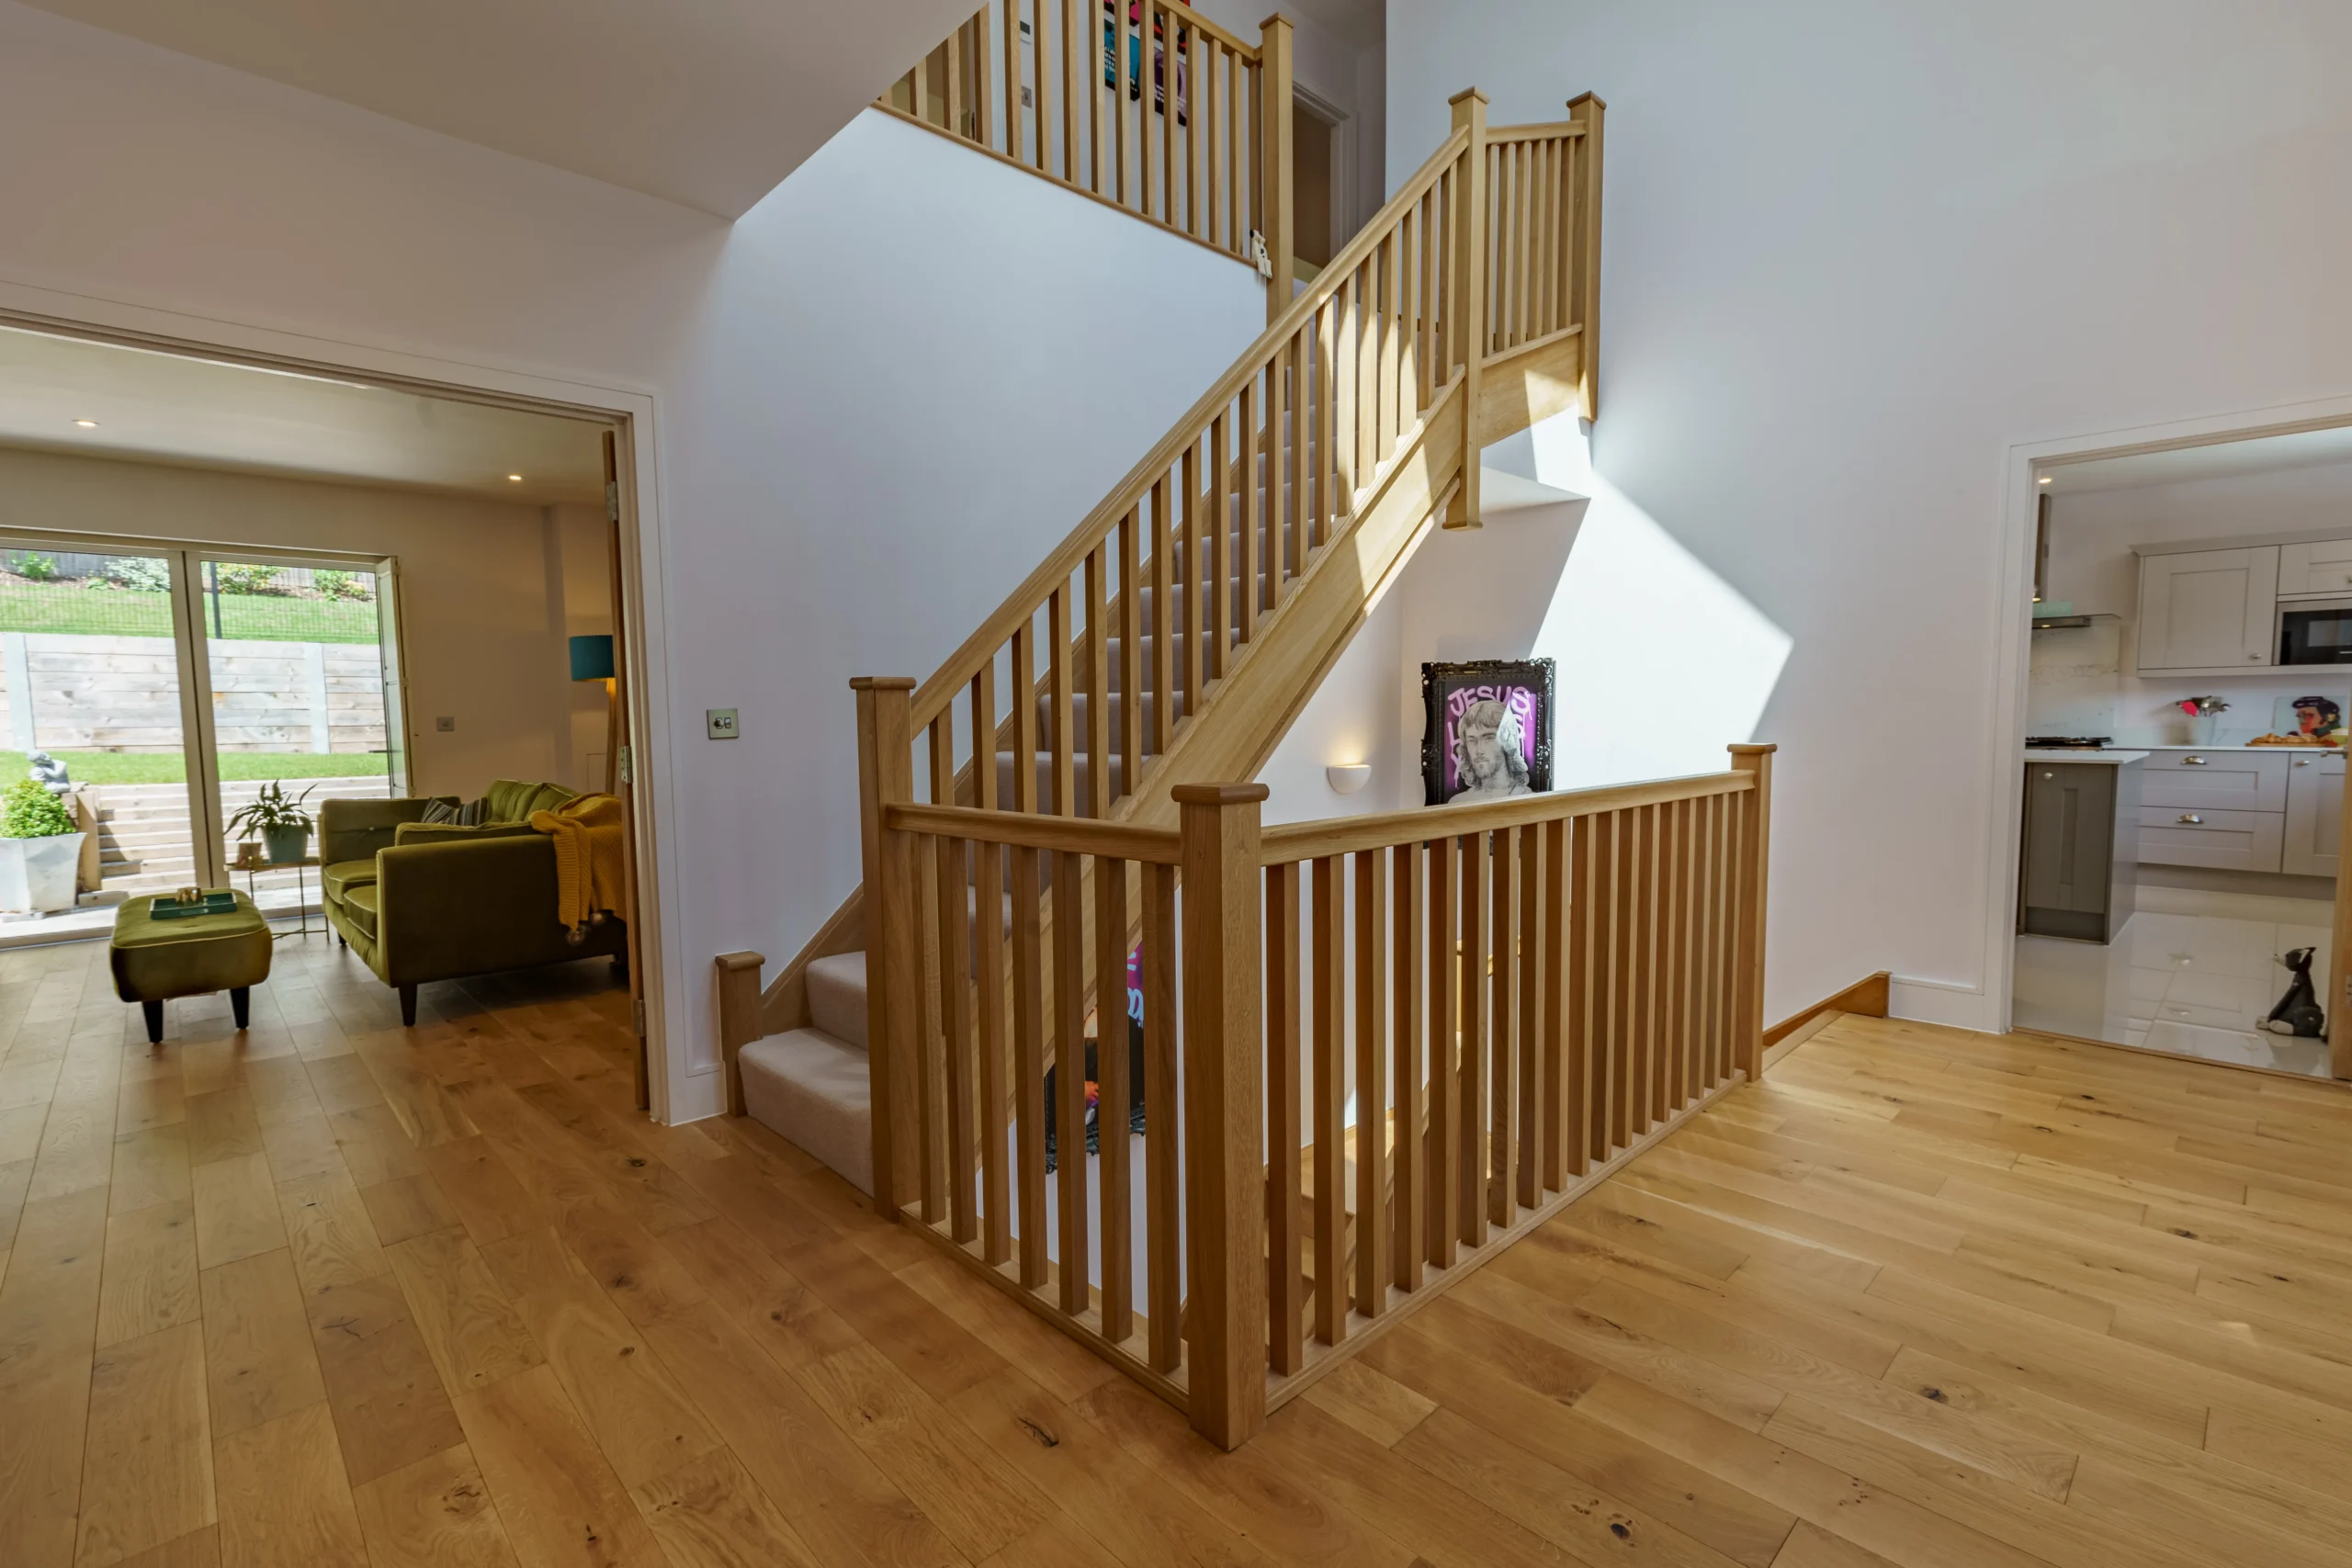 Inside the house is a wooden staircase leading to a landing, with white walls in the living room.